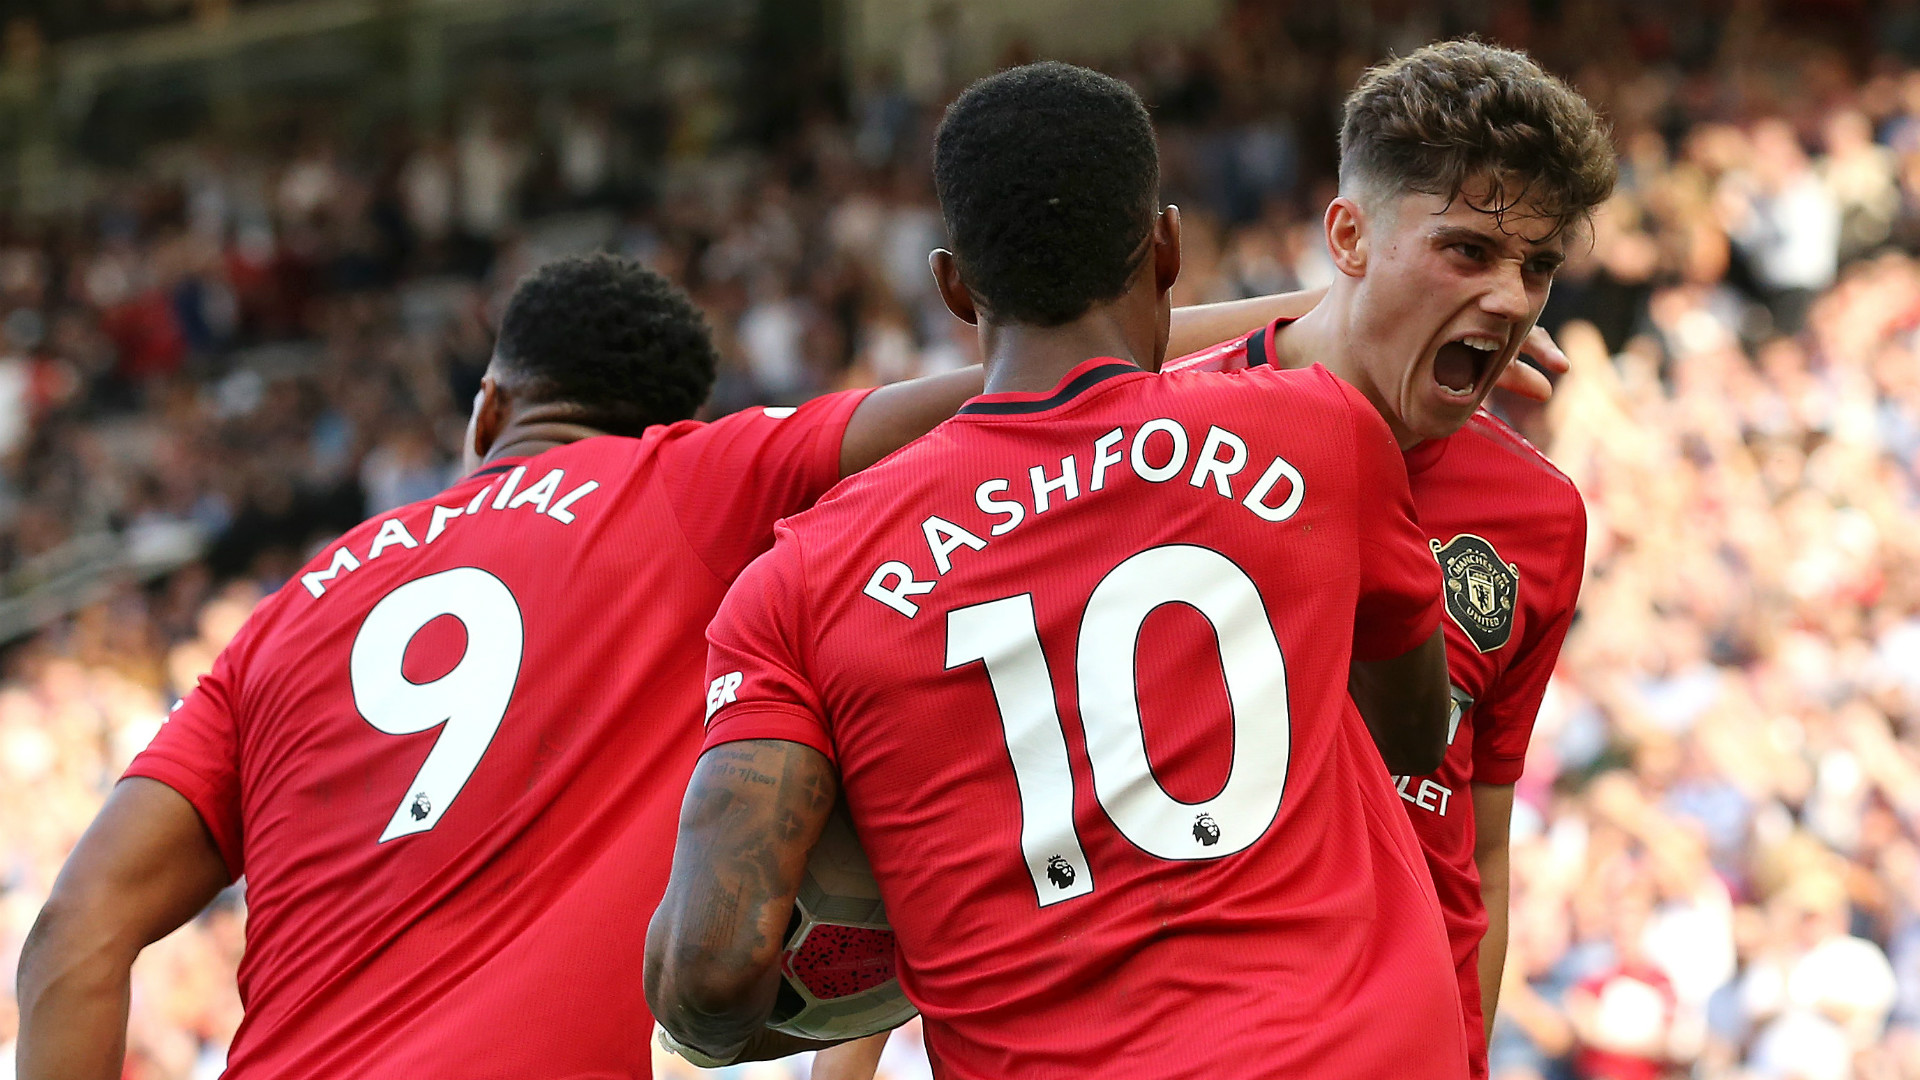 Daniel James inspired by Chelsea & Arsenal legends while also looking up to Man Utd icon Giggs